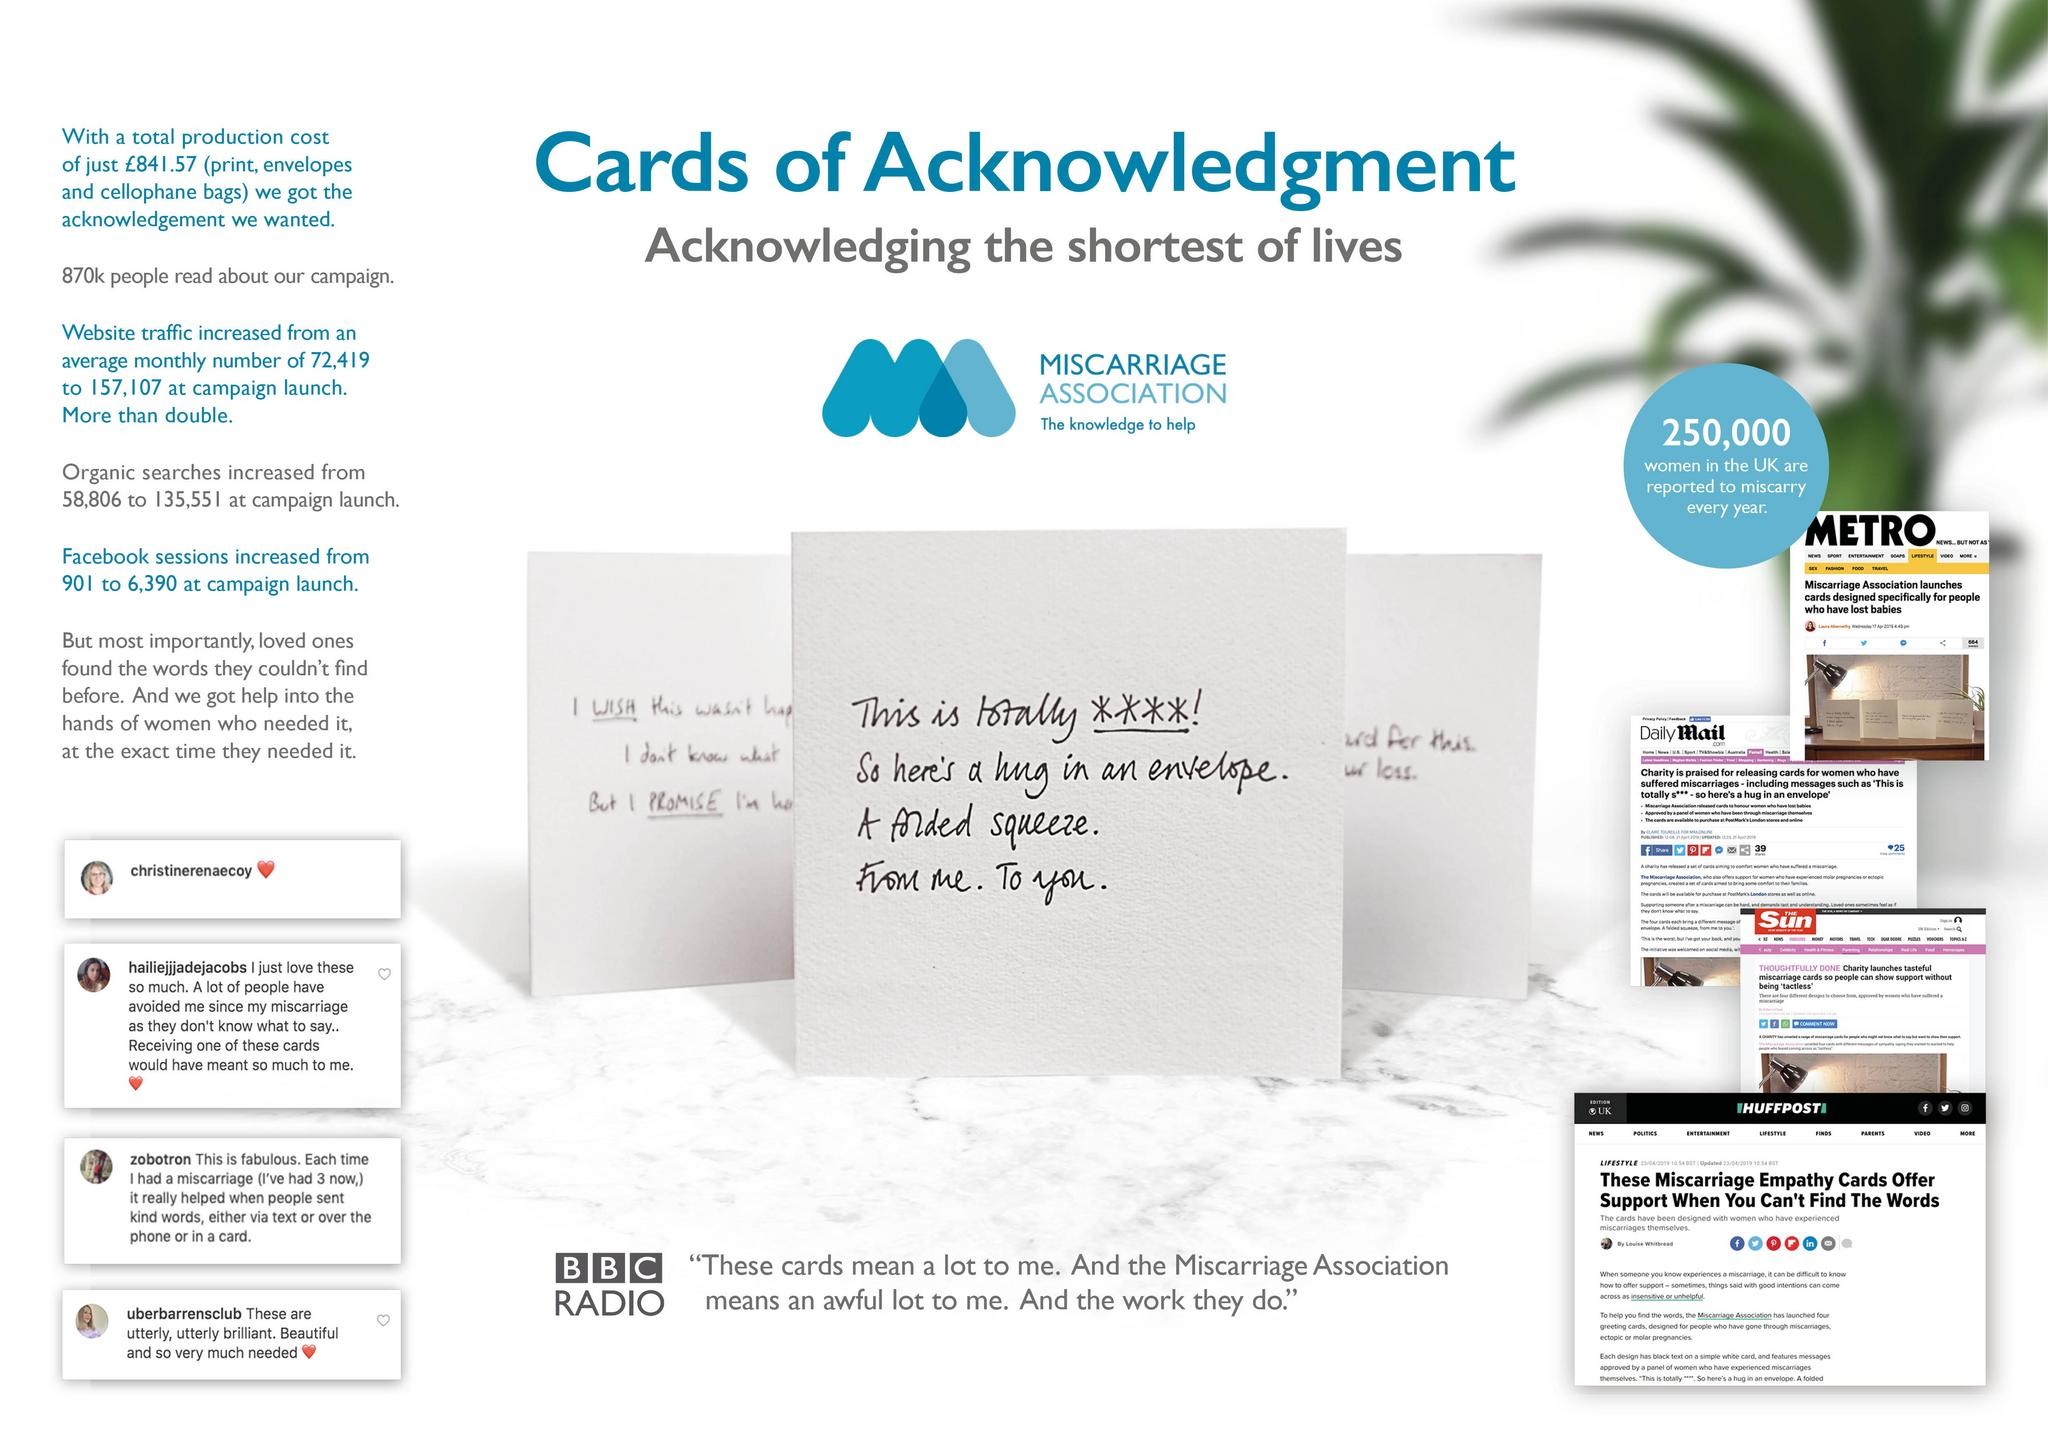 Cards of Acknowledgement